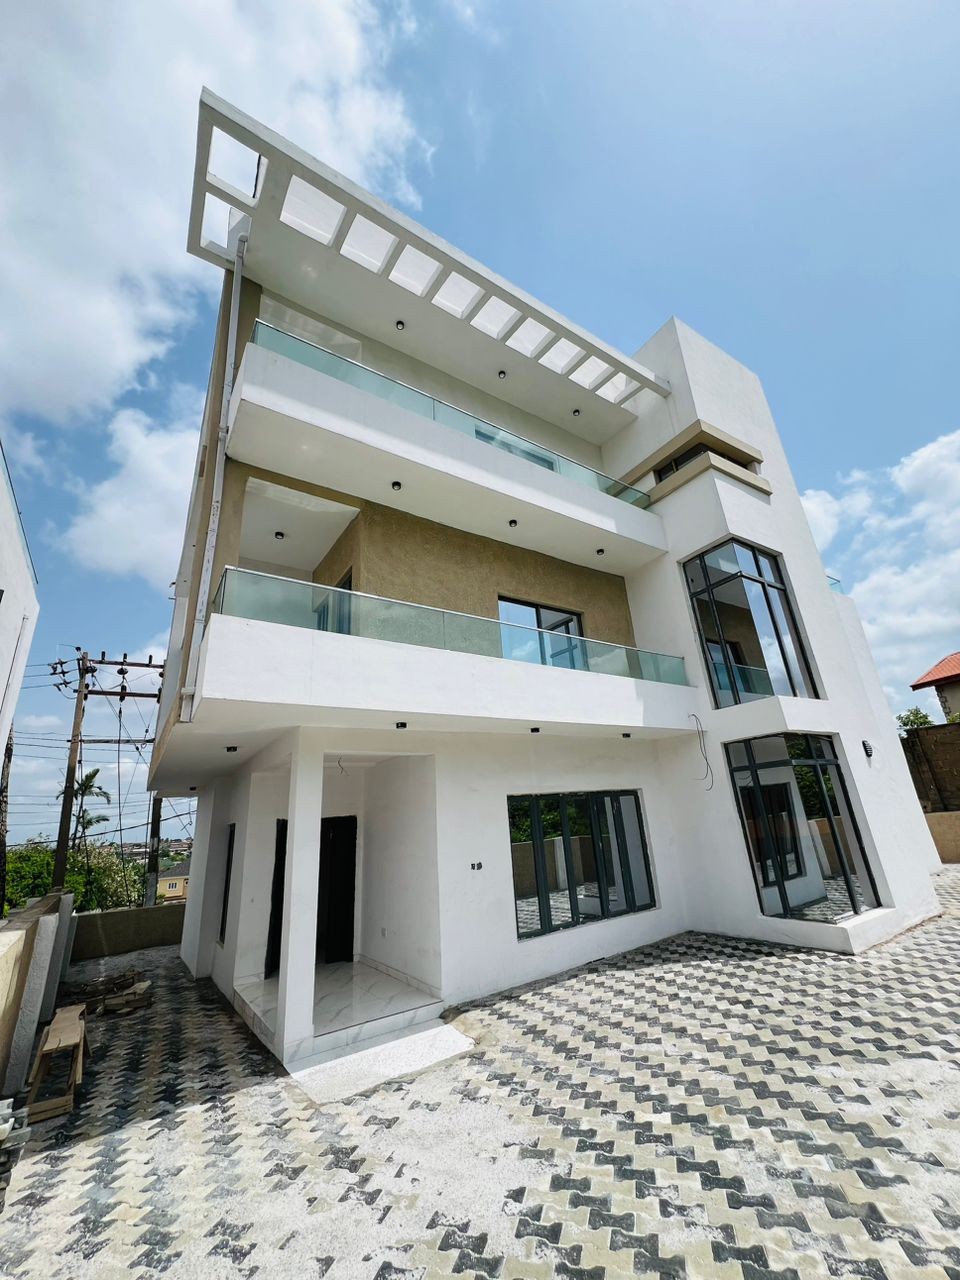 Newly build 5 bedroom duplex in gated estate